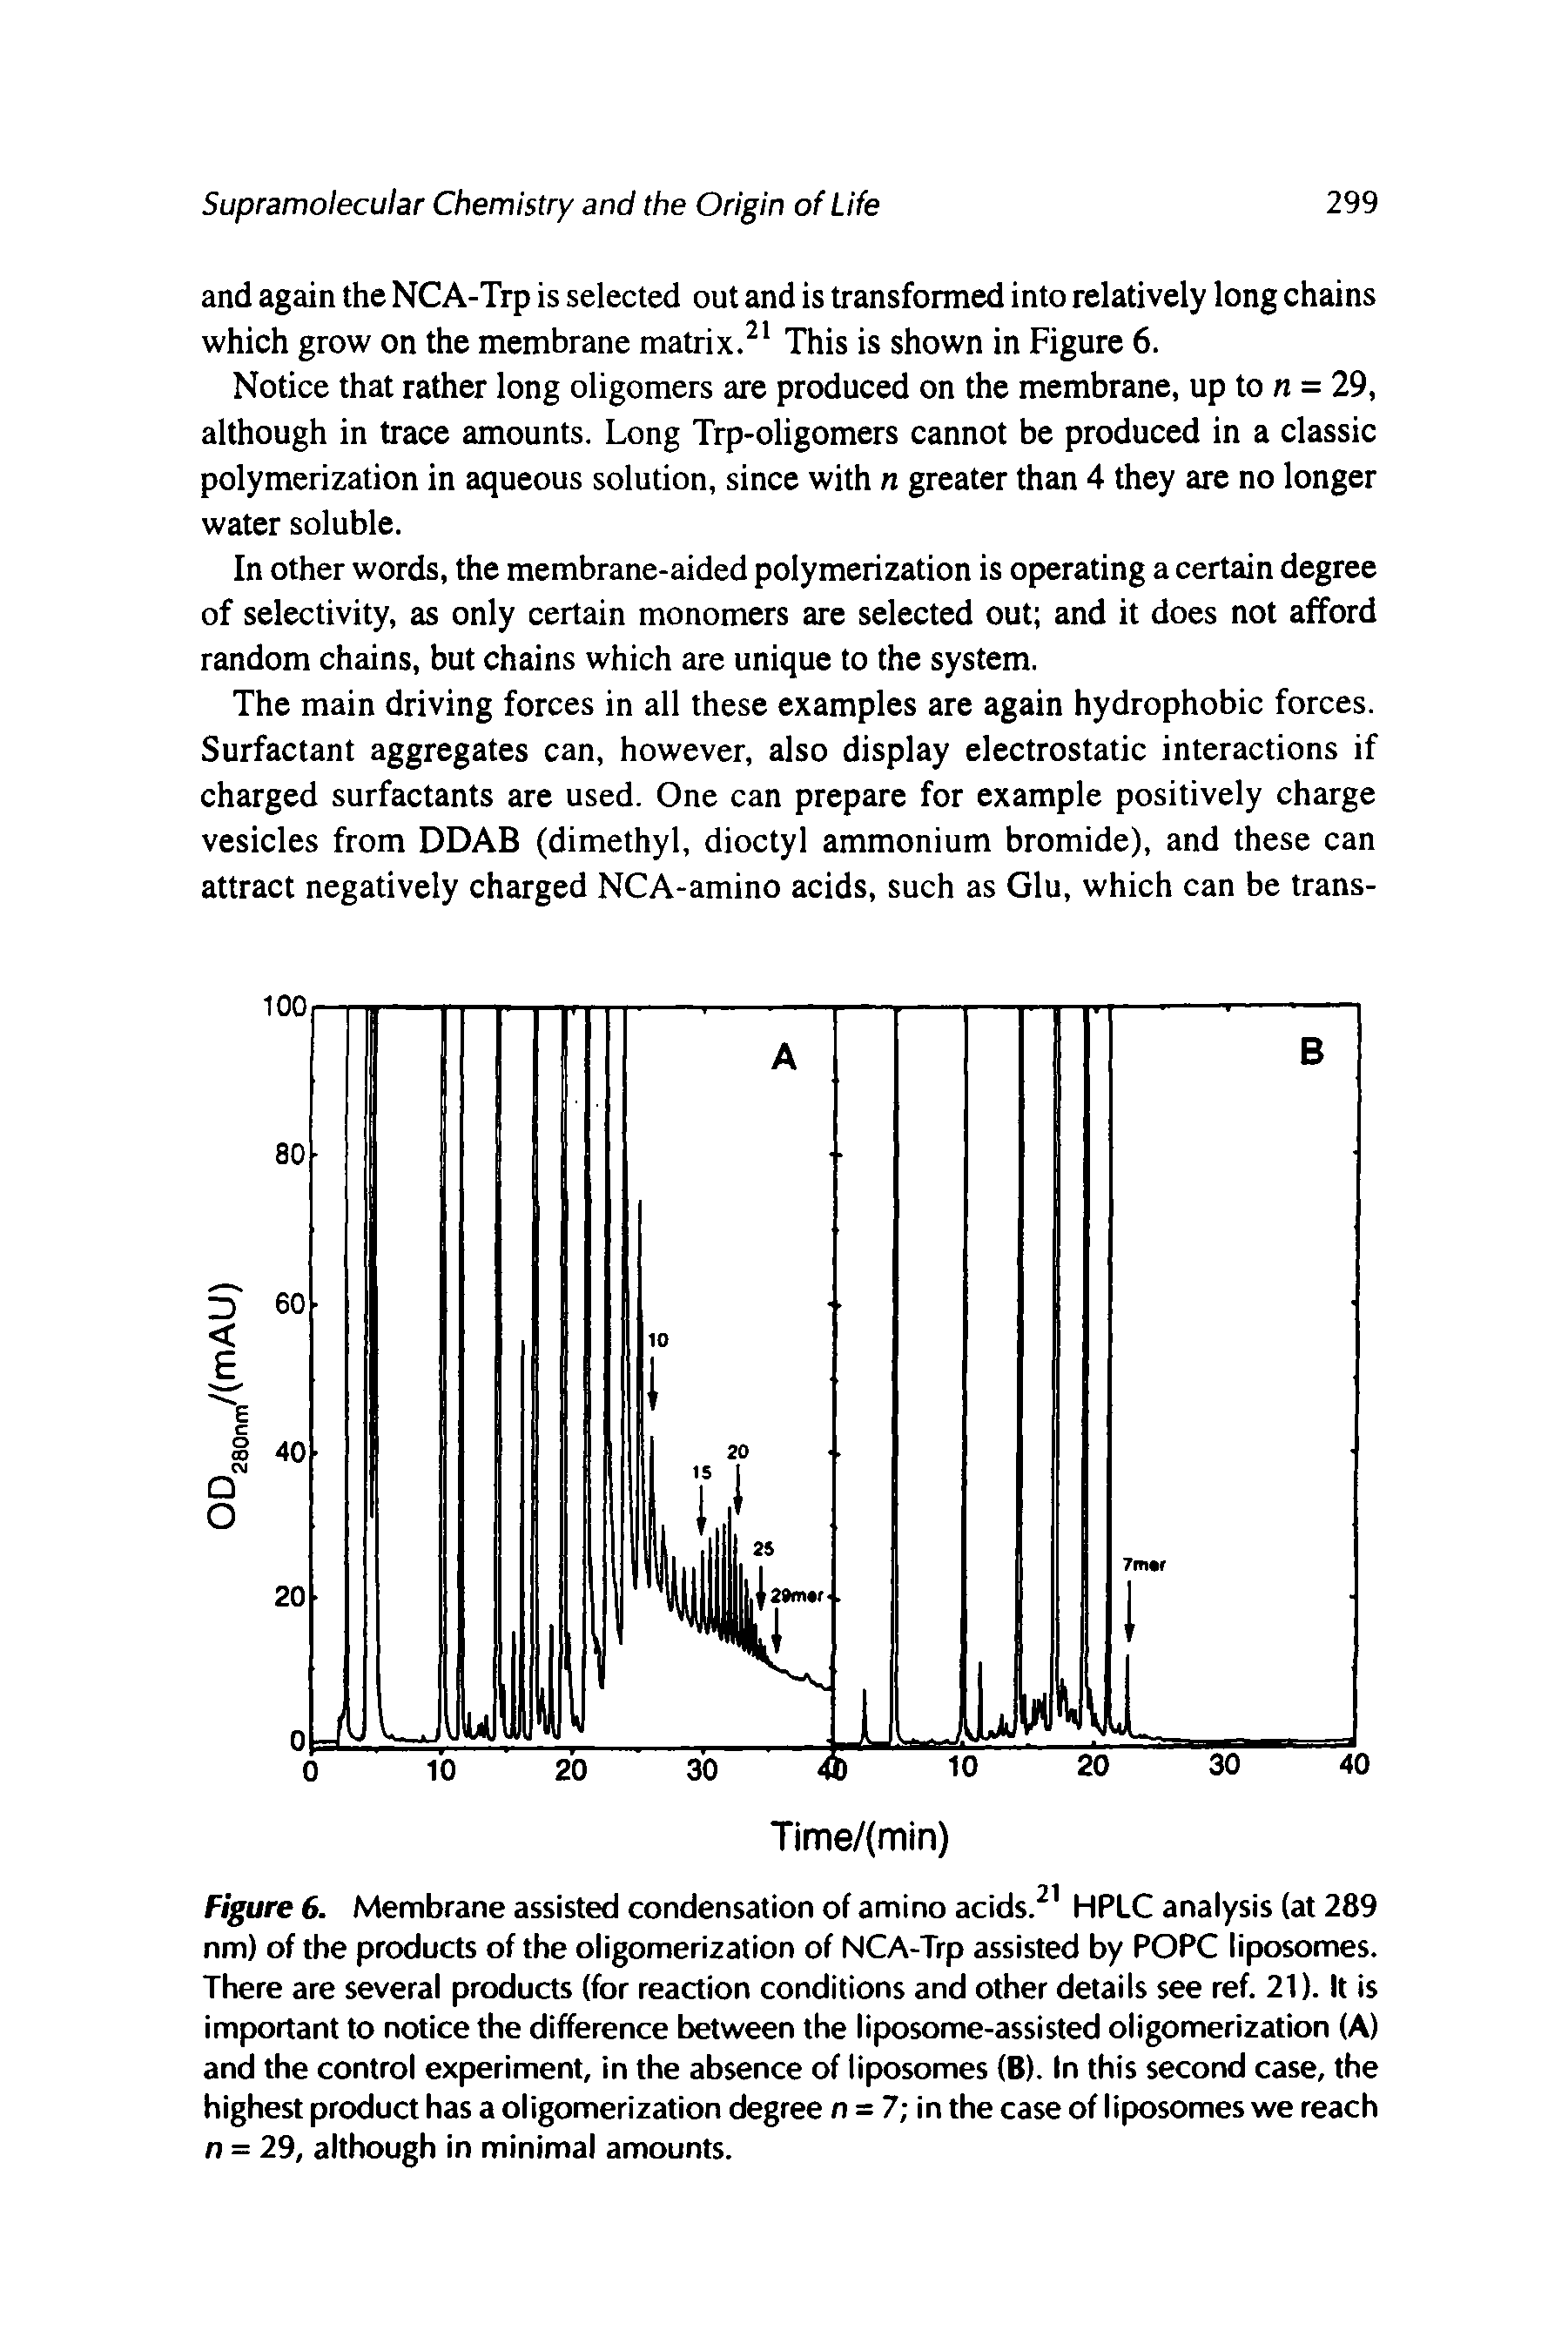 Figure 6. Membrane assisted condensation of amino acids. HPLC analysis (at 289 nm) of the products of the oligomerization of NCA-Trp assisted by POPC liposomes. There are several products (for reaction conditions and other details see ref. 21). It is important to notice the difference between the liposome-assisted oligomerization (A) and the control experiment, in the absence of liposomes (B). In this second case, the highest product has a oligomerization degree n = 7 in the case of liposomes we reach n = 29, although in minimal amounts.